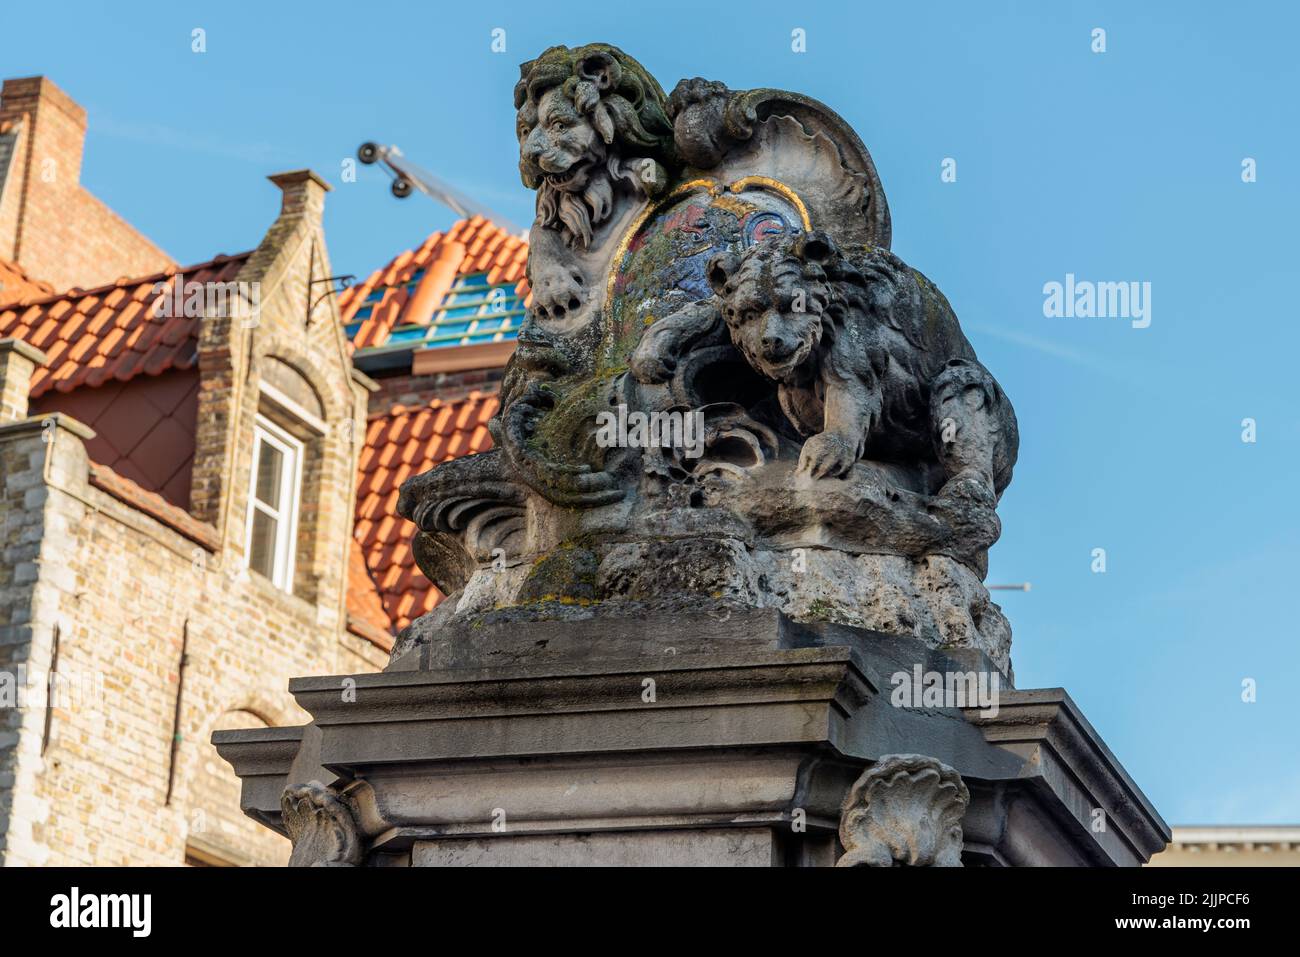 The famous Brugge statue with Lion and Bear in Brugge, Belgium Stock Photo